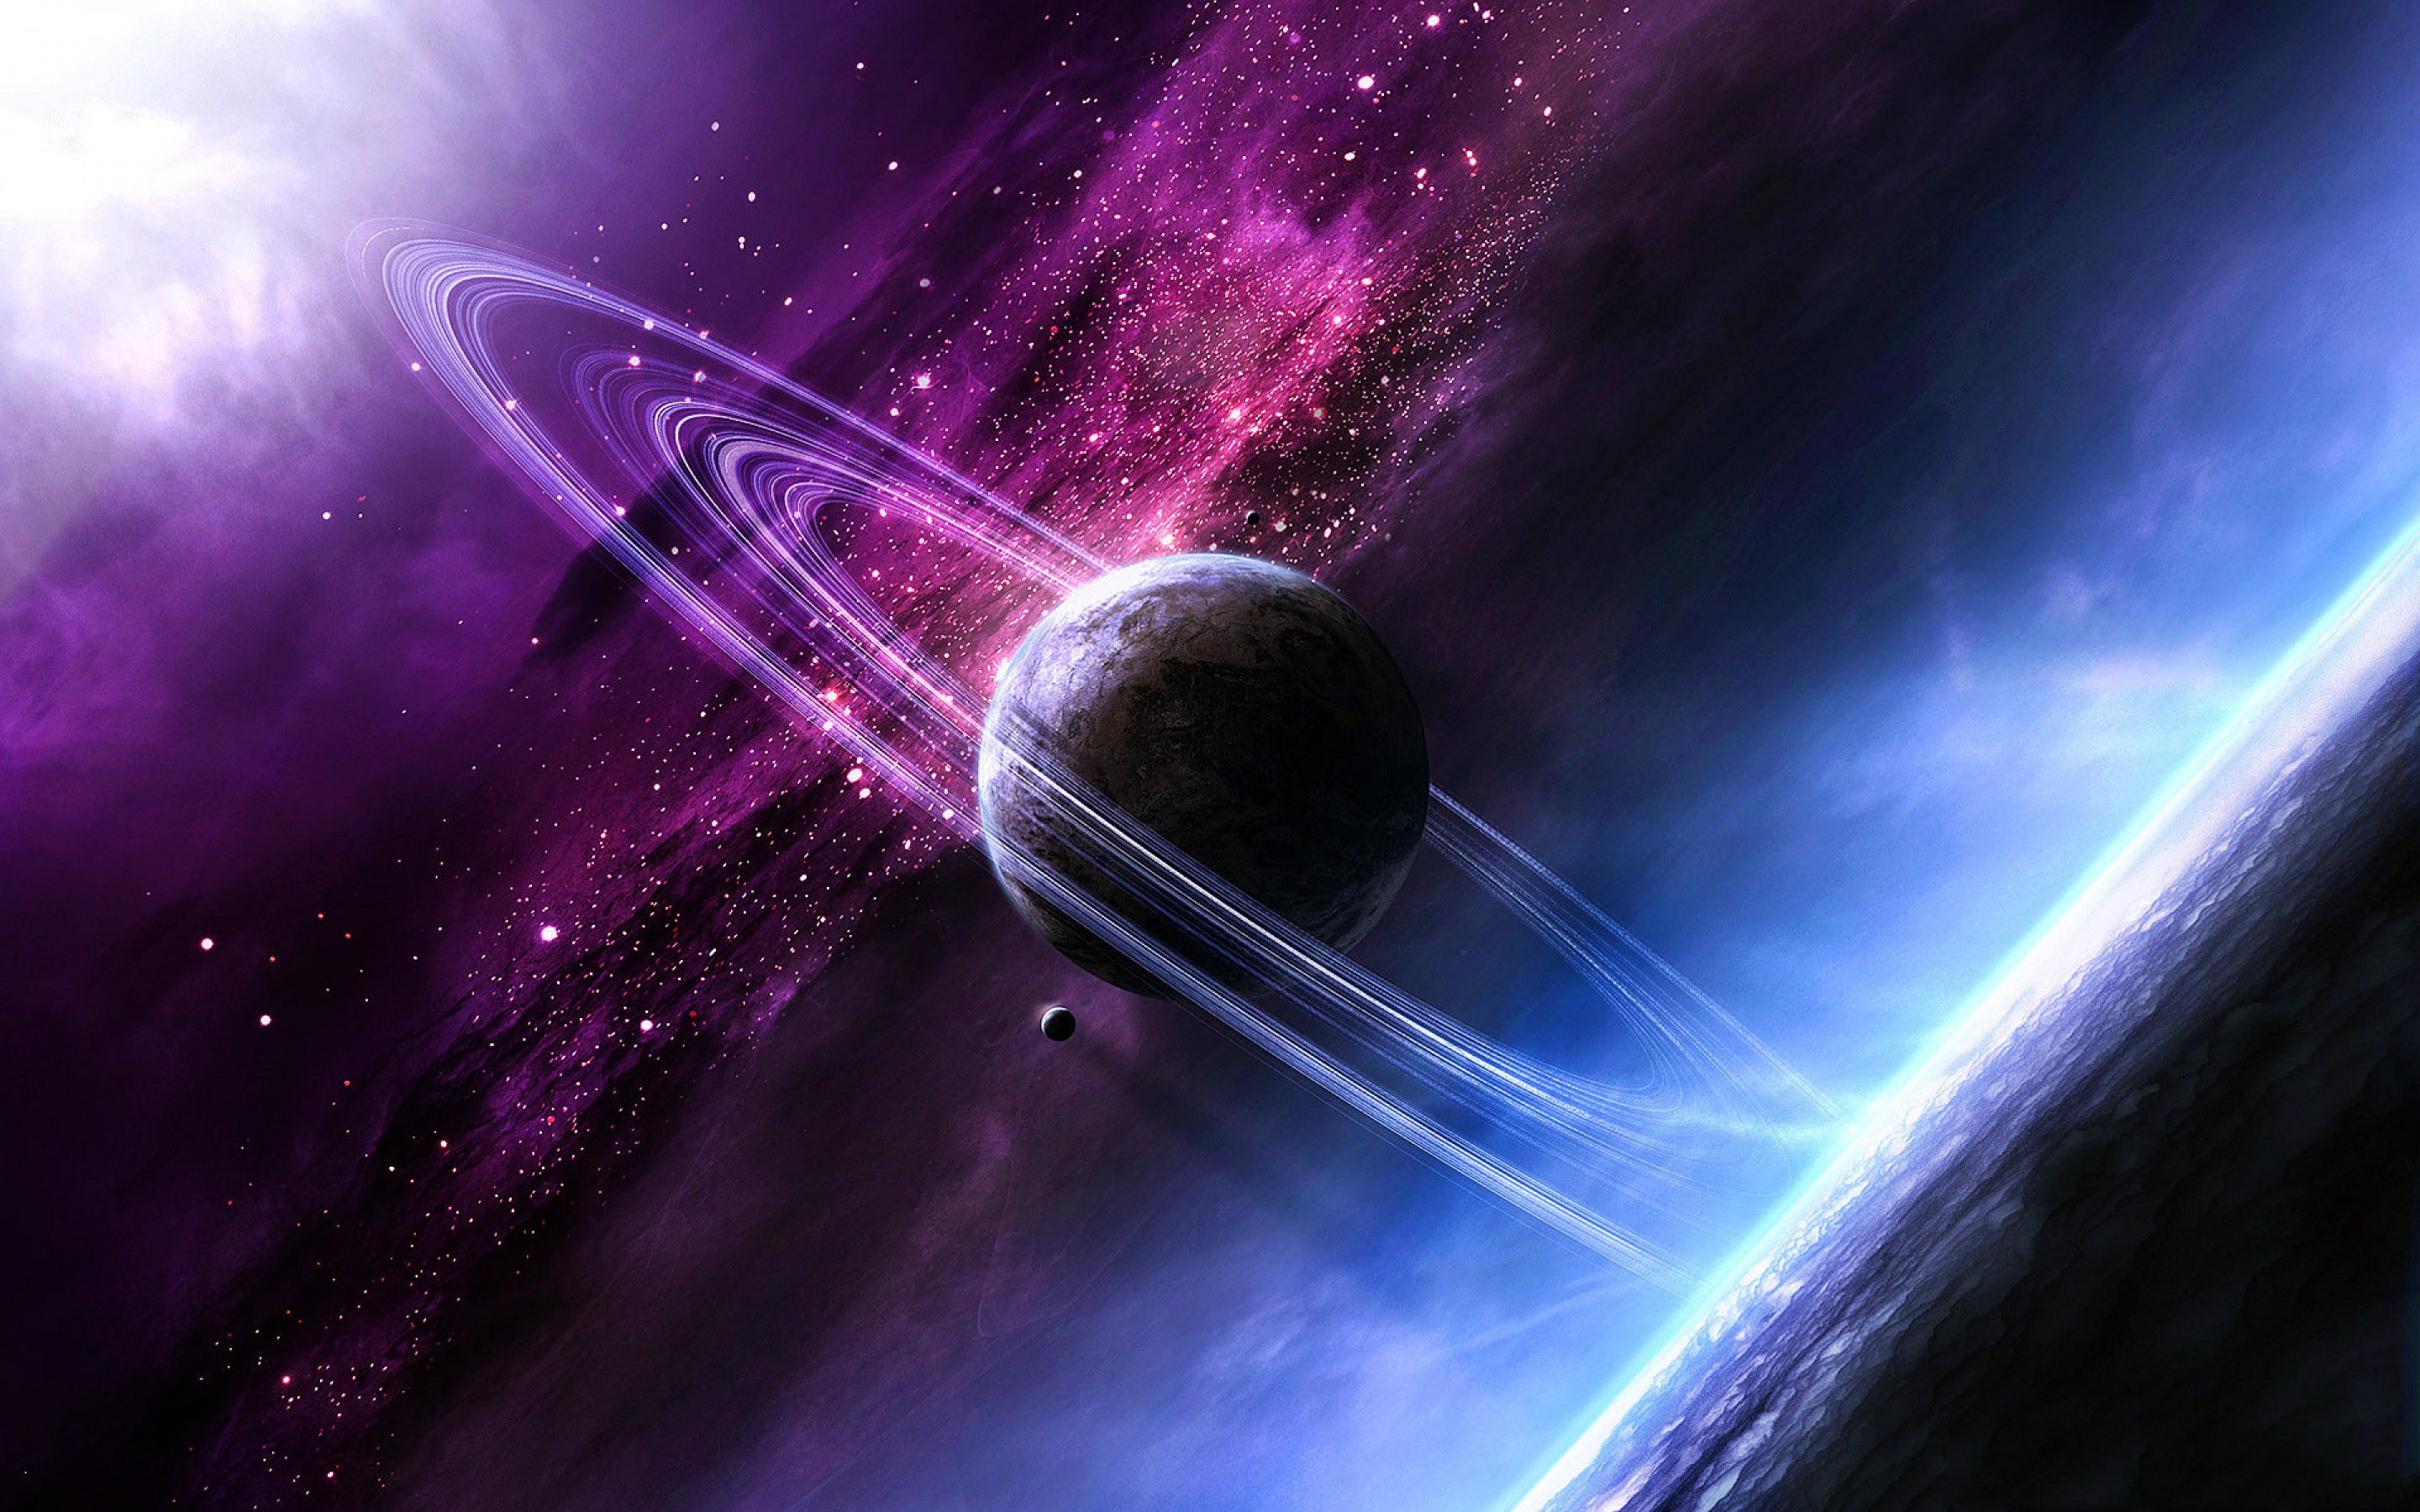 The Best High Quality Super HD Space Wallpaper Is